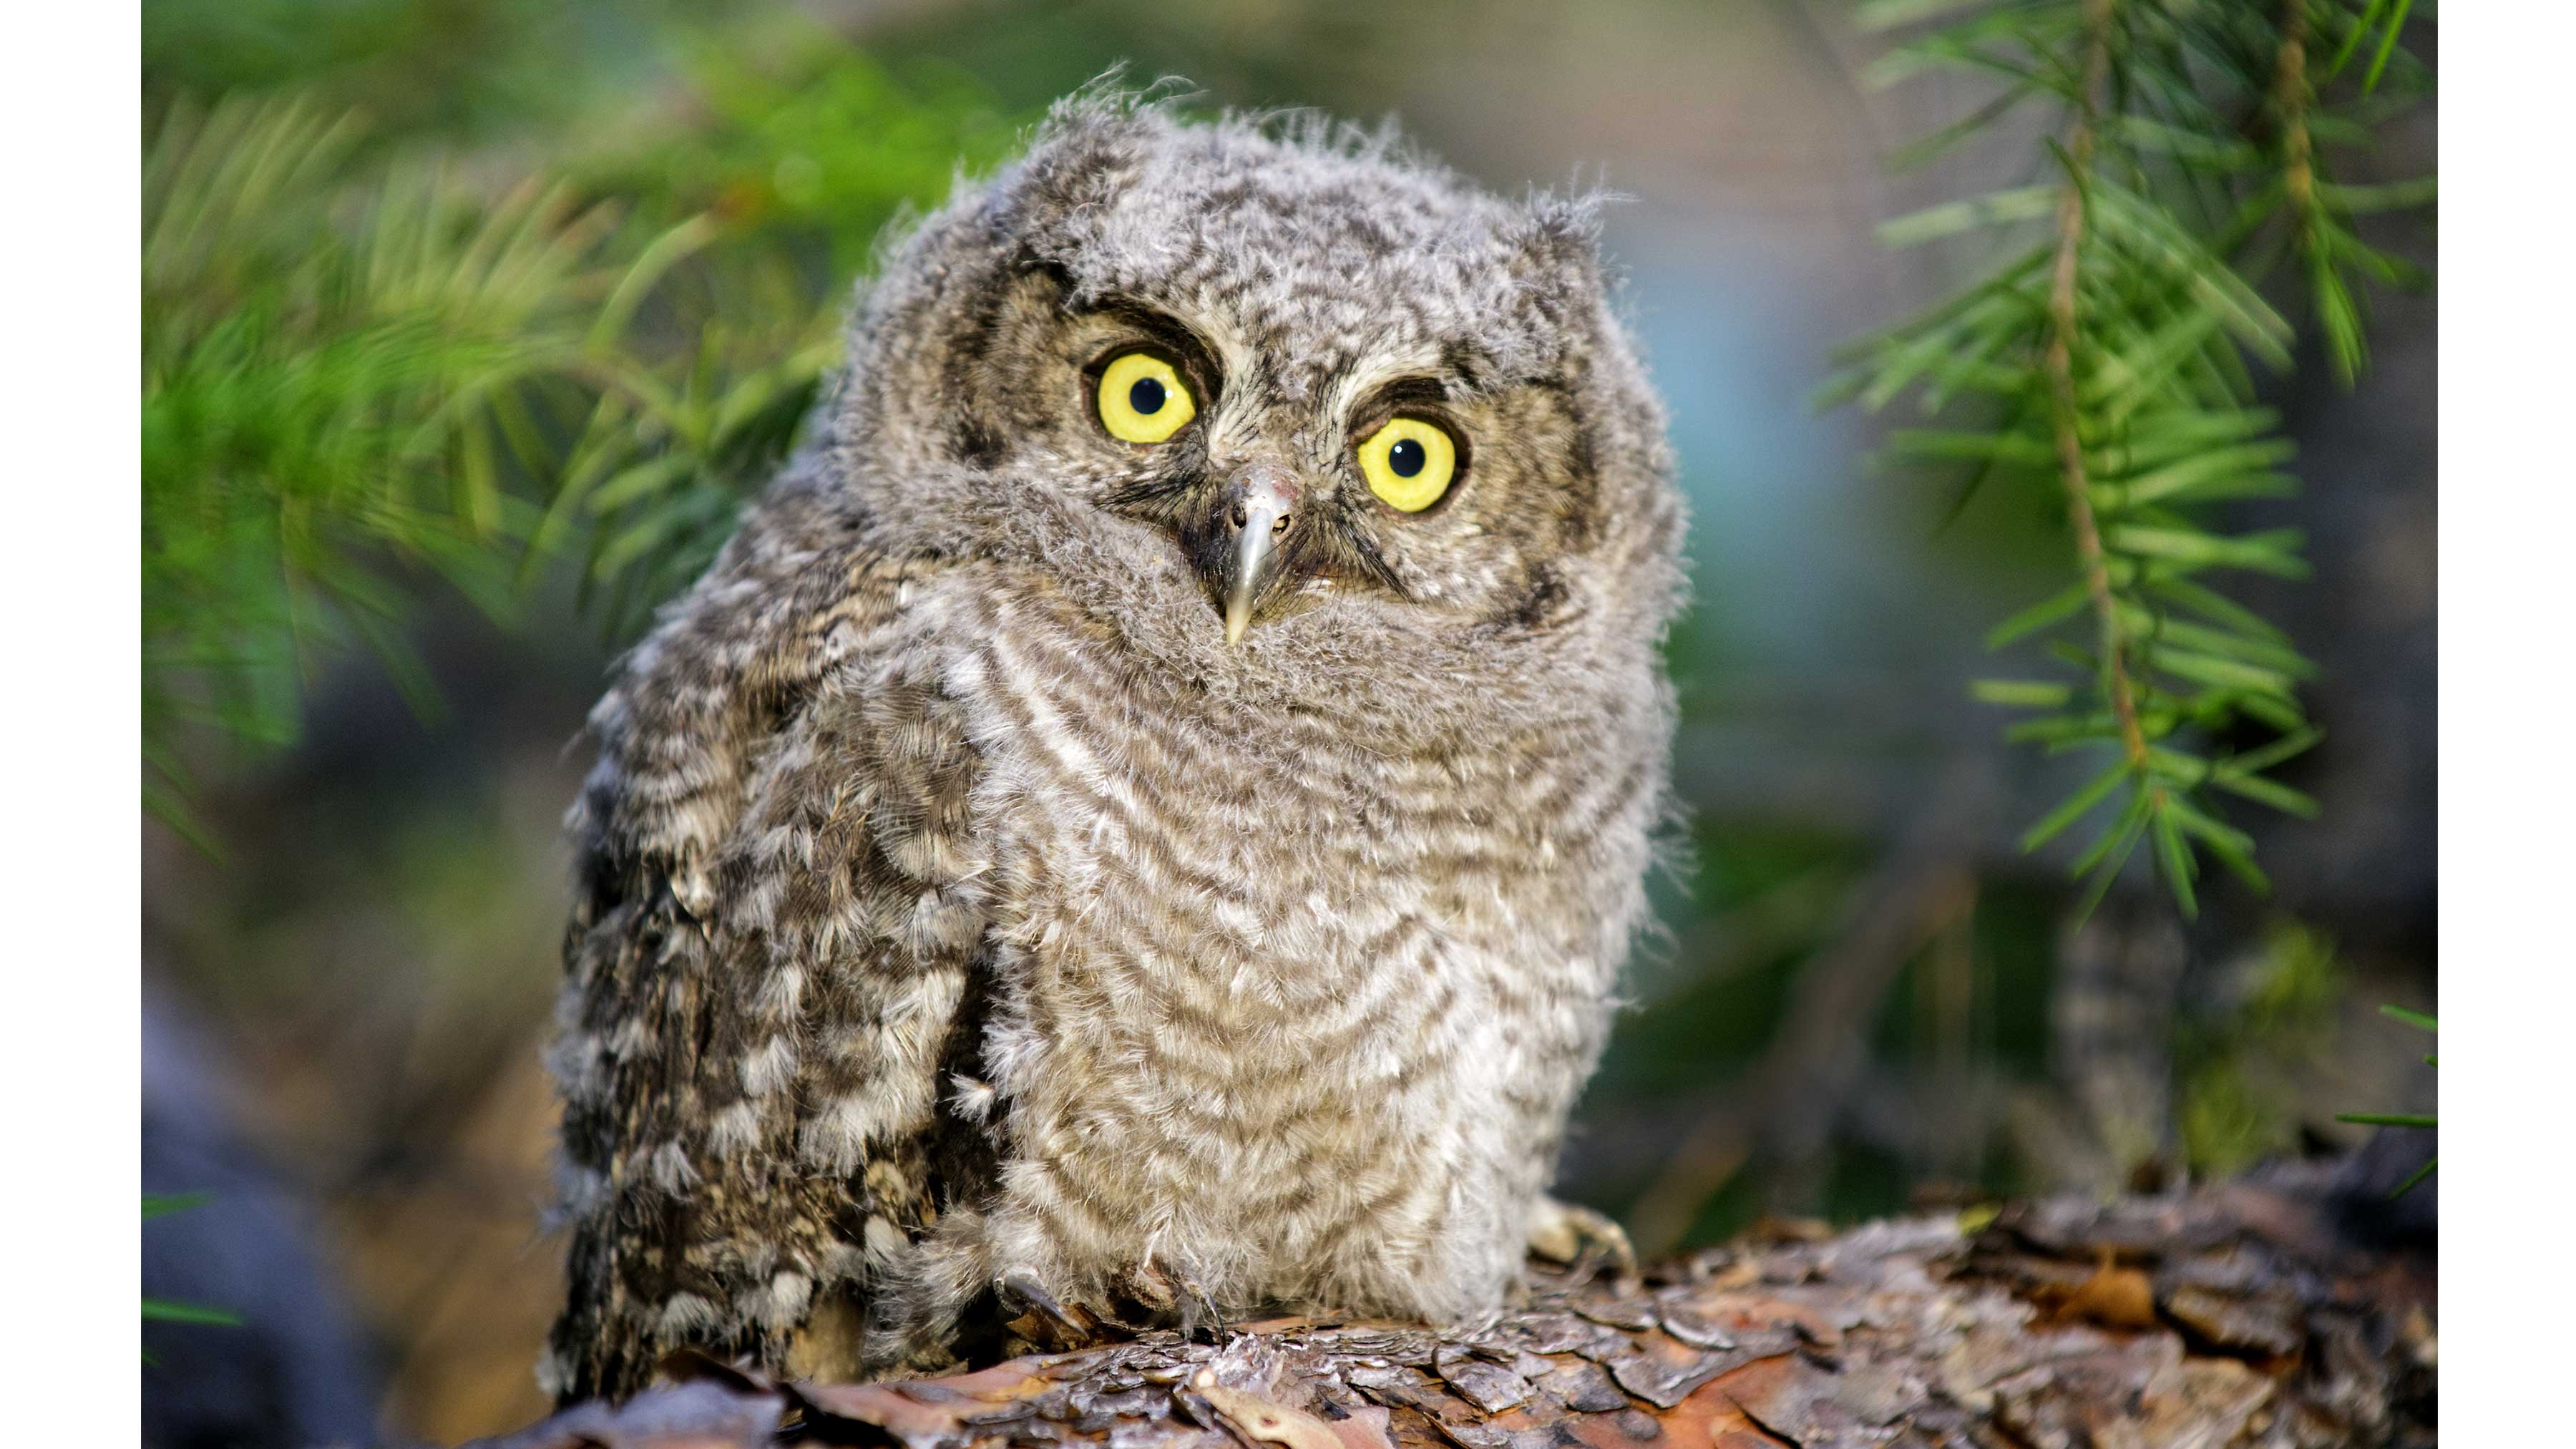 Wayne Lynch's photo of a fluffy western screech owl chick with bright yellow eyes sitting on a tree branch.